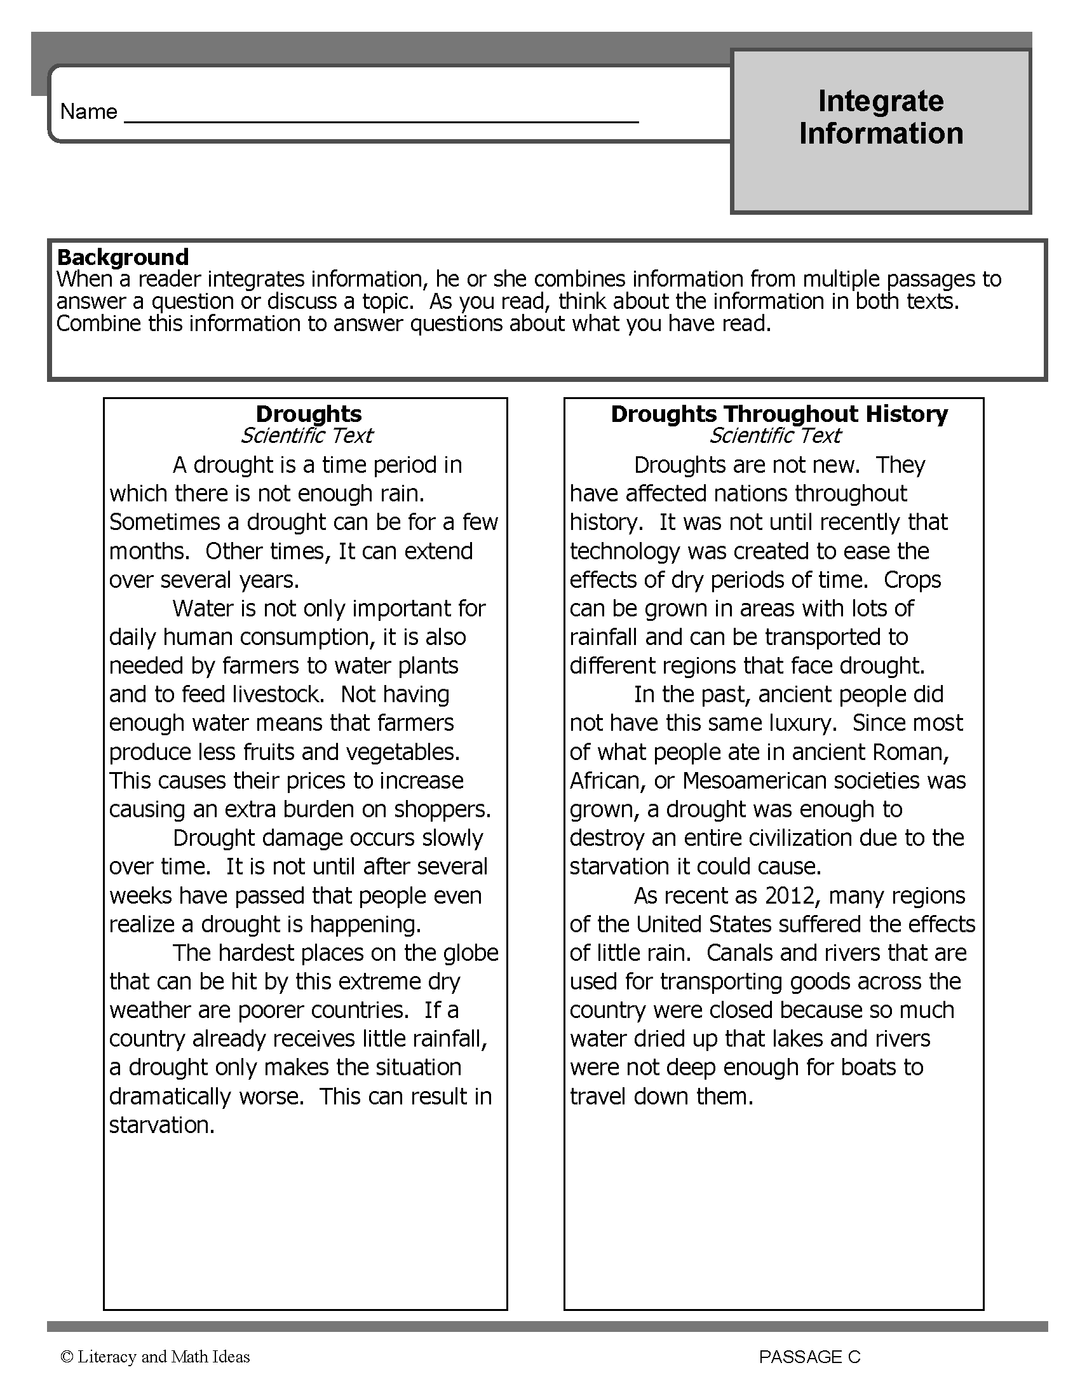 Reading Comprehension: Integrate Texts